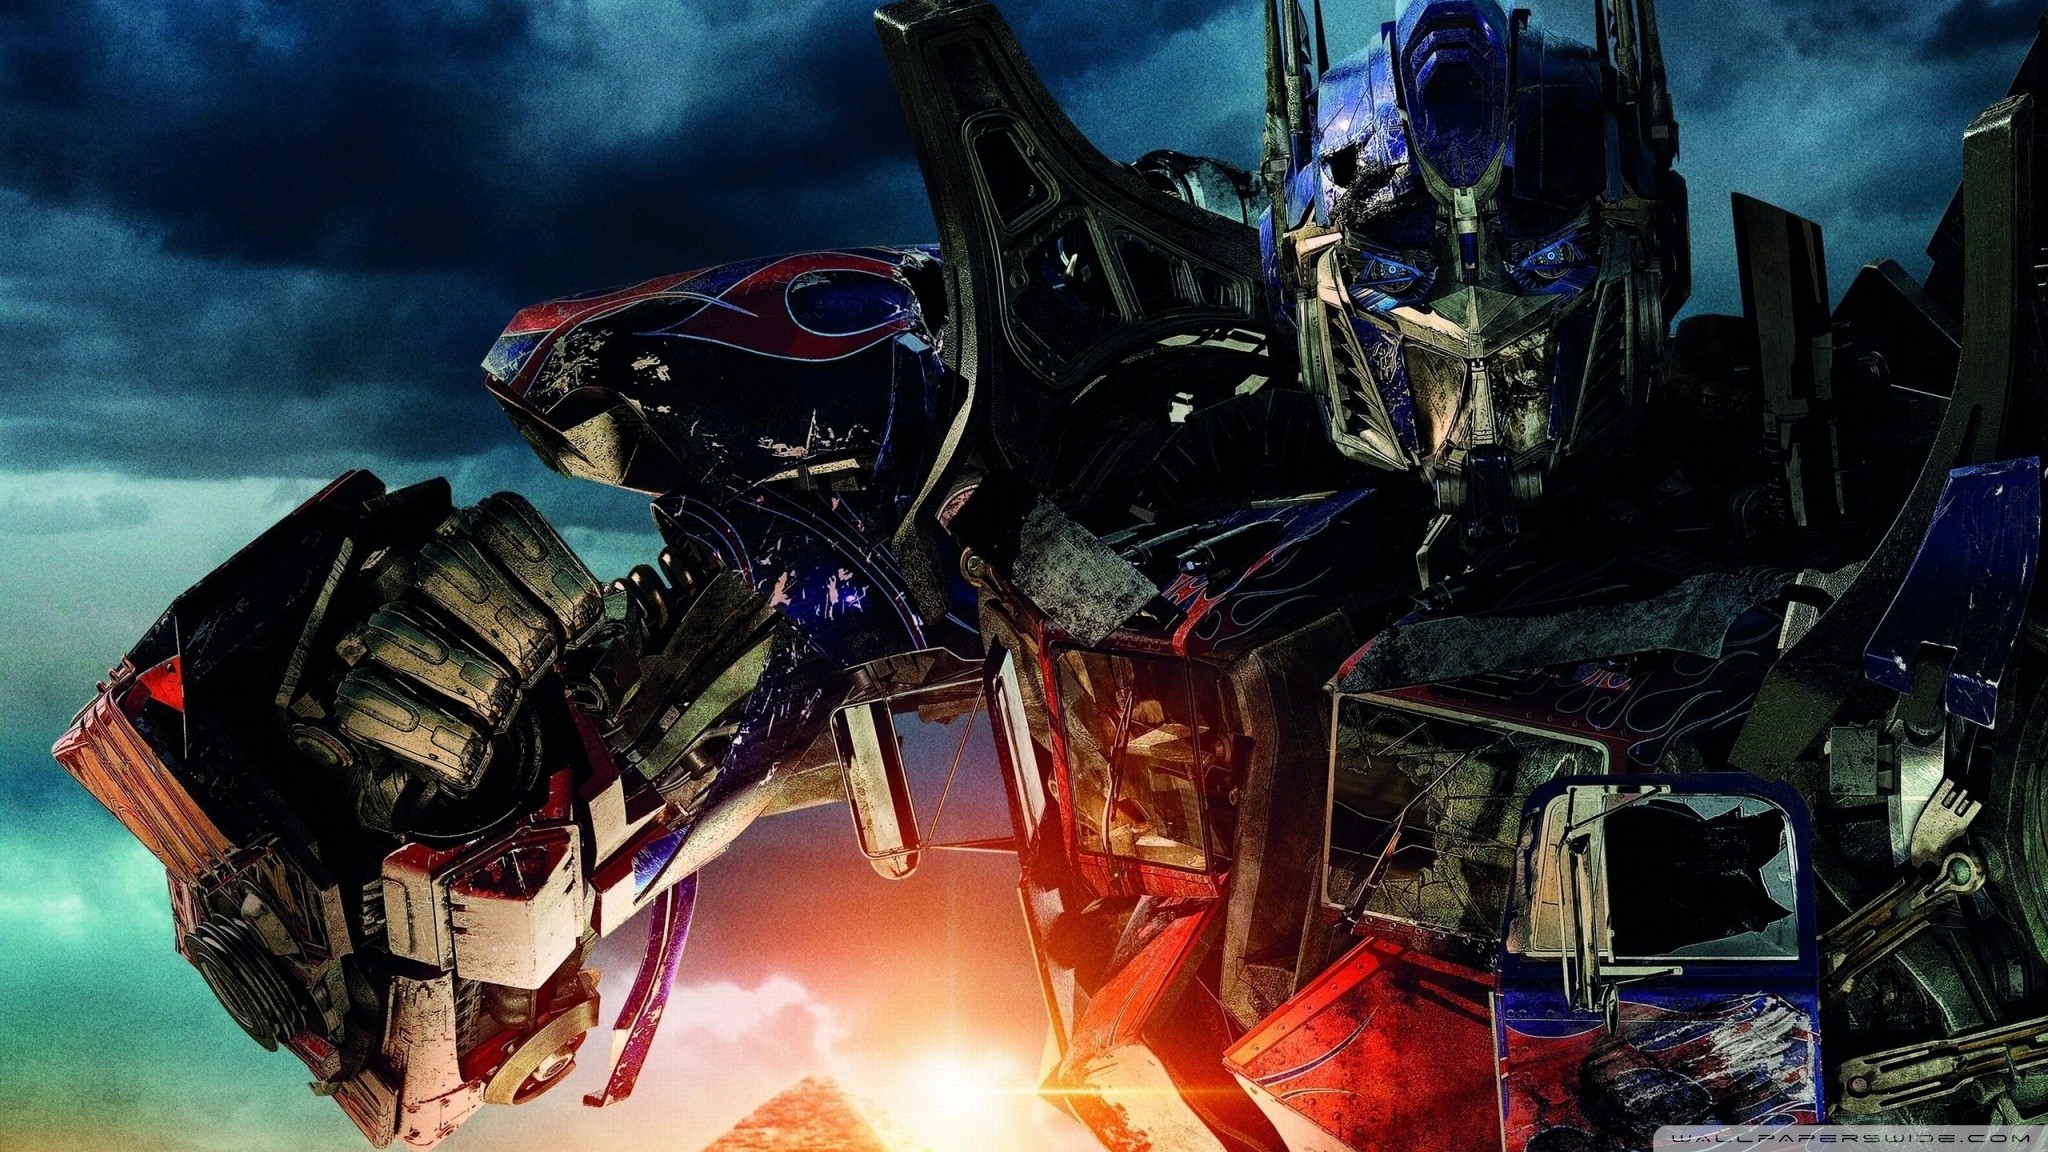 Optimus Prime in Transformers 4 Age of Extinction Wallpapers  HD Wallpapers   ID 13506